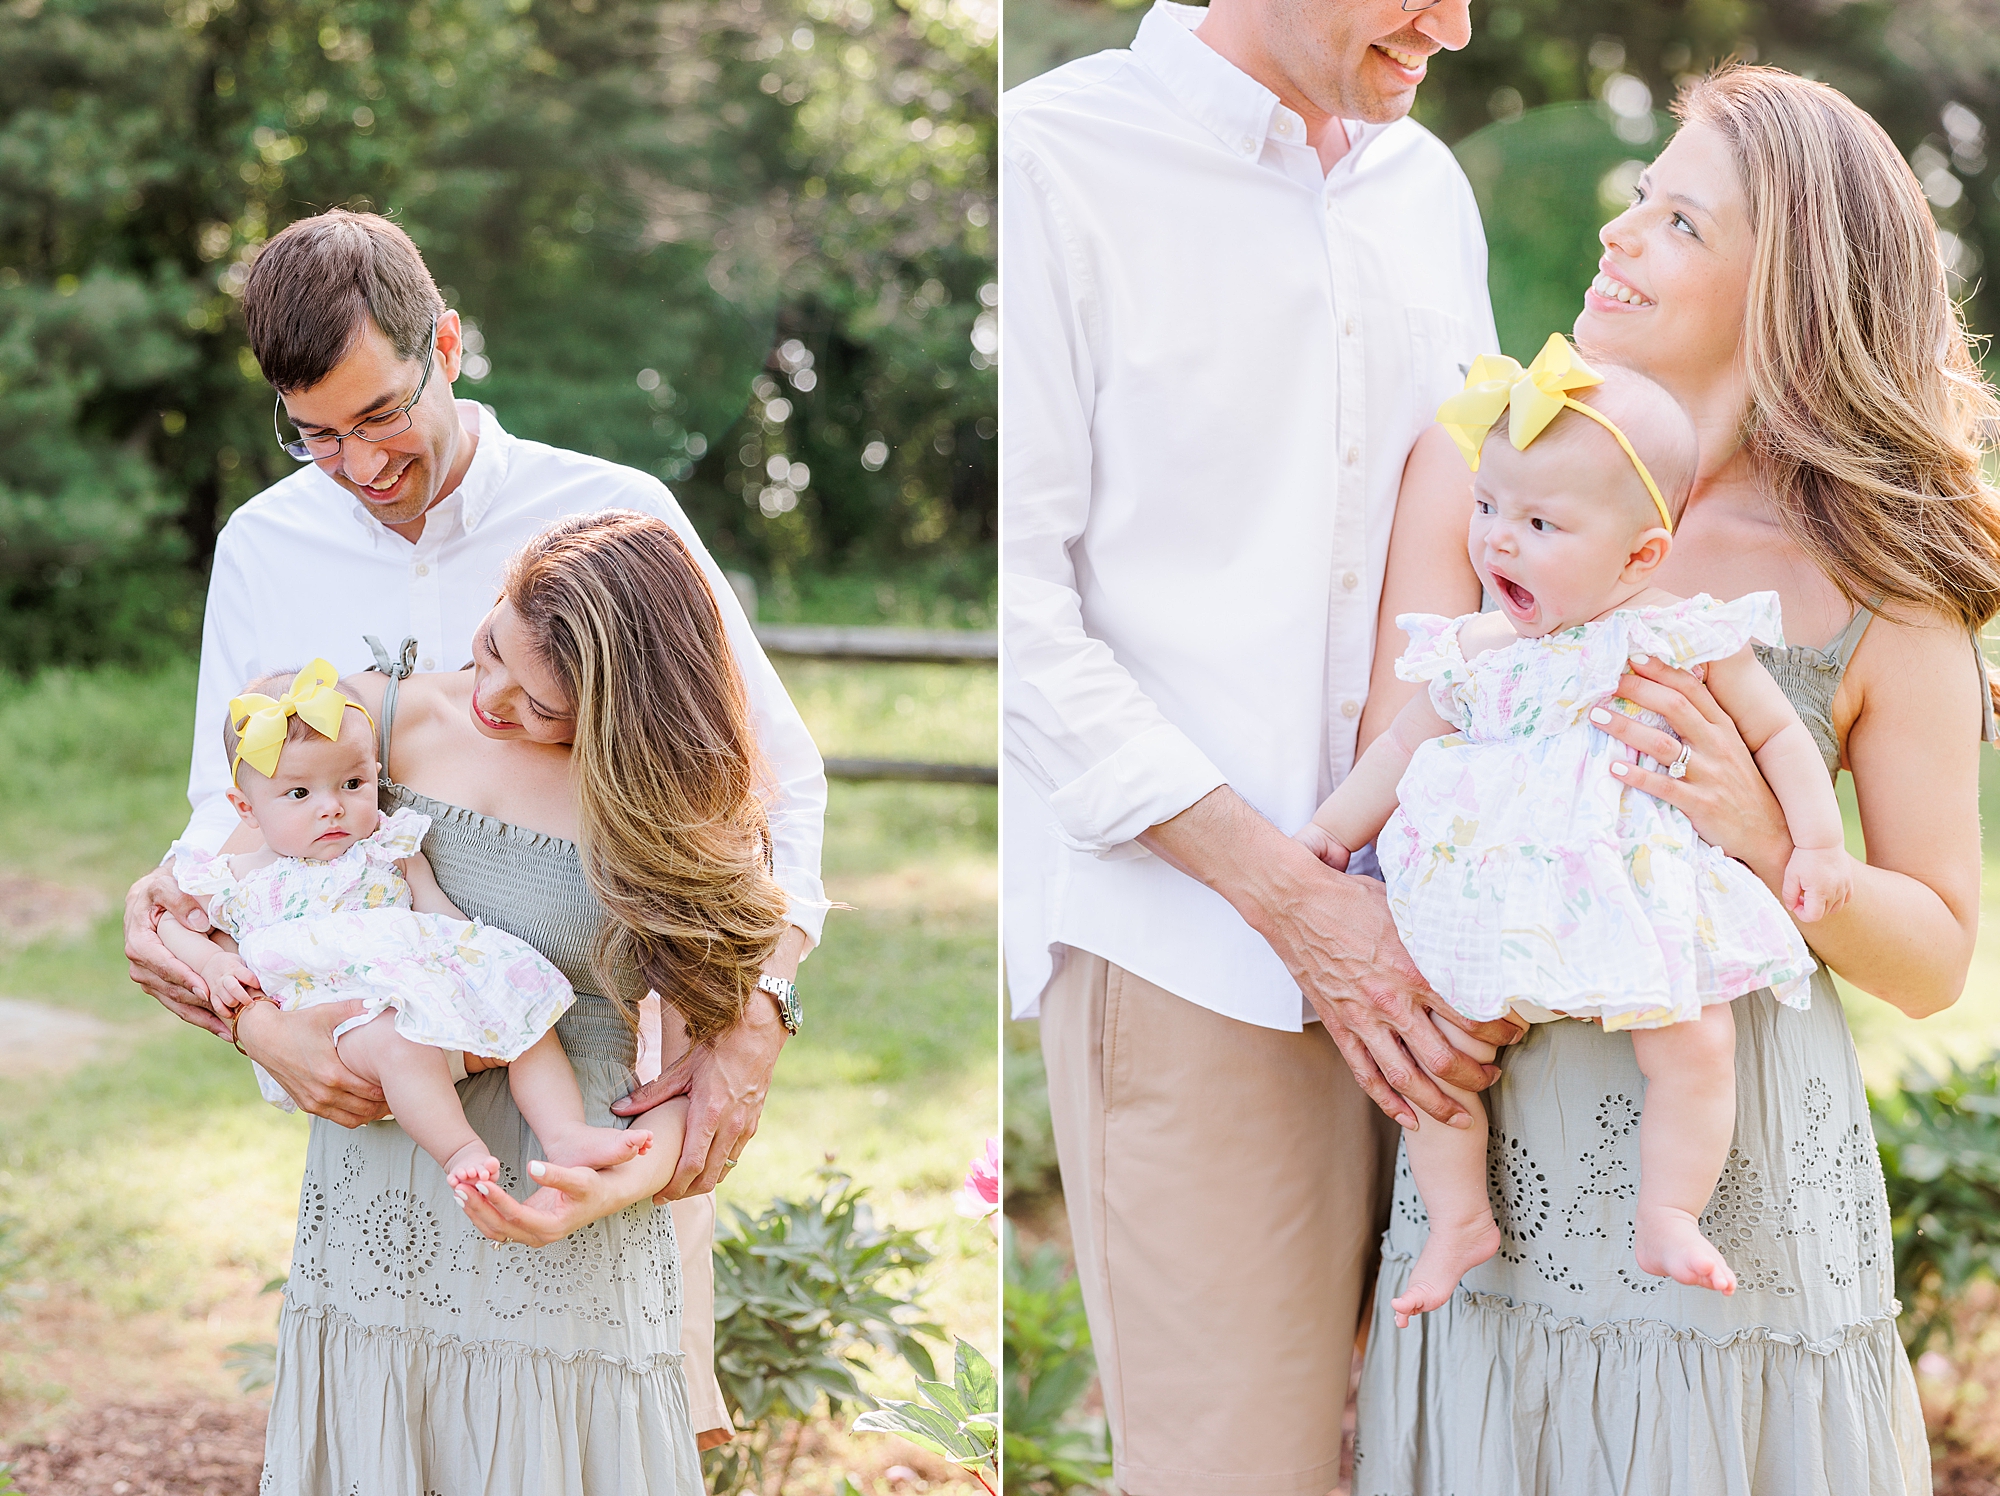 new parents smile together holding daughter during photos in peonies